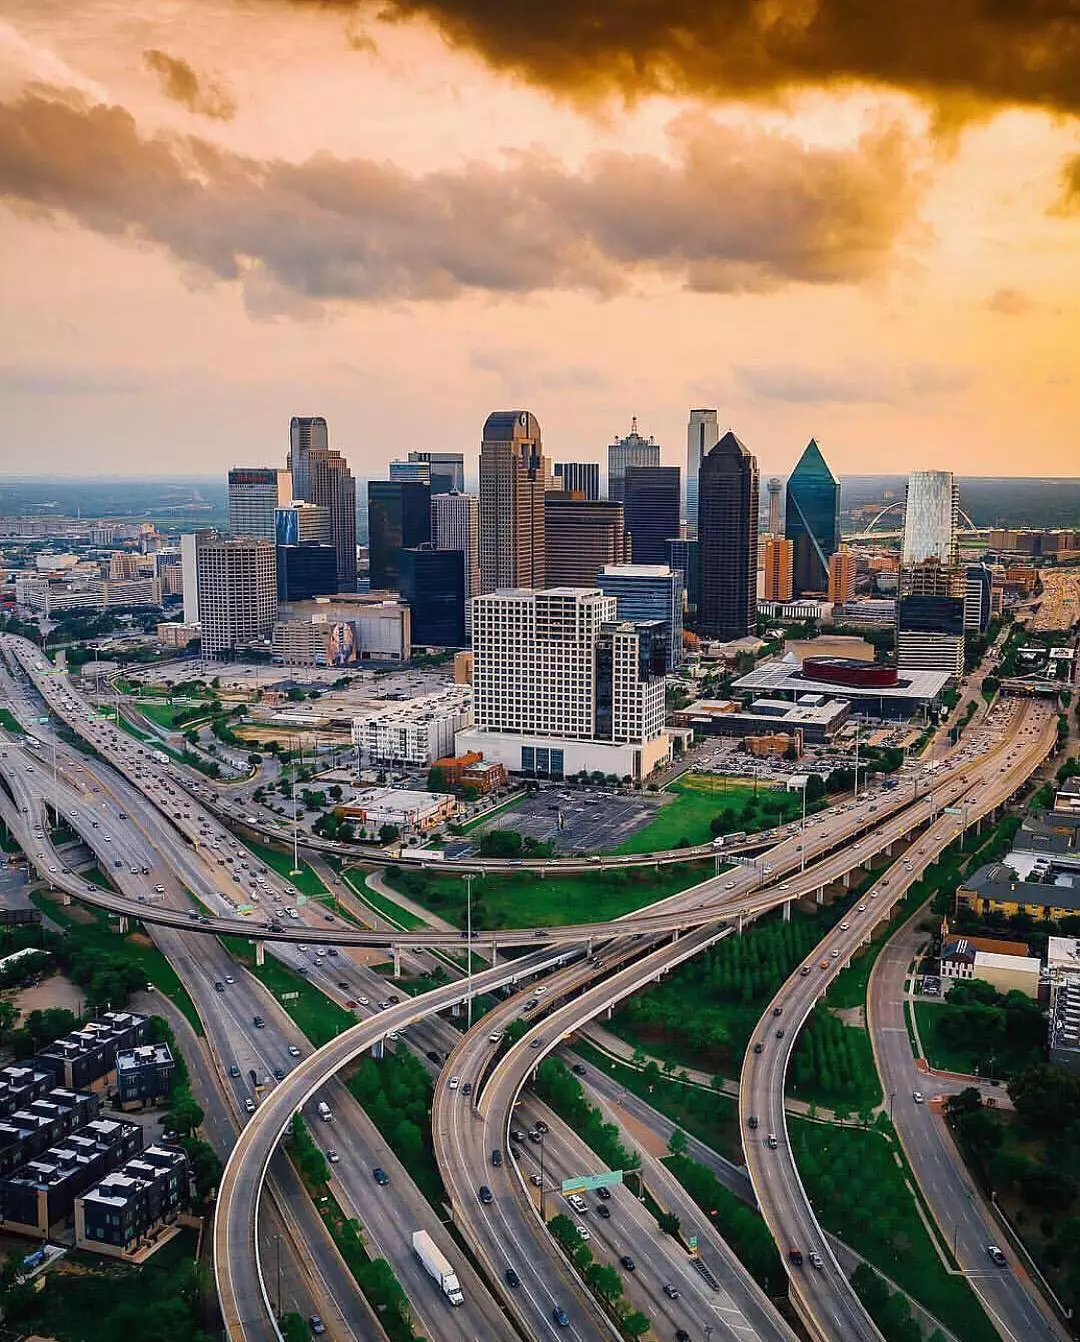 10 Things To Know Before Moving to Dallas - Life Storage Blog